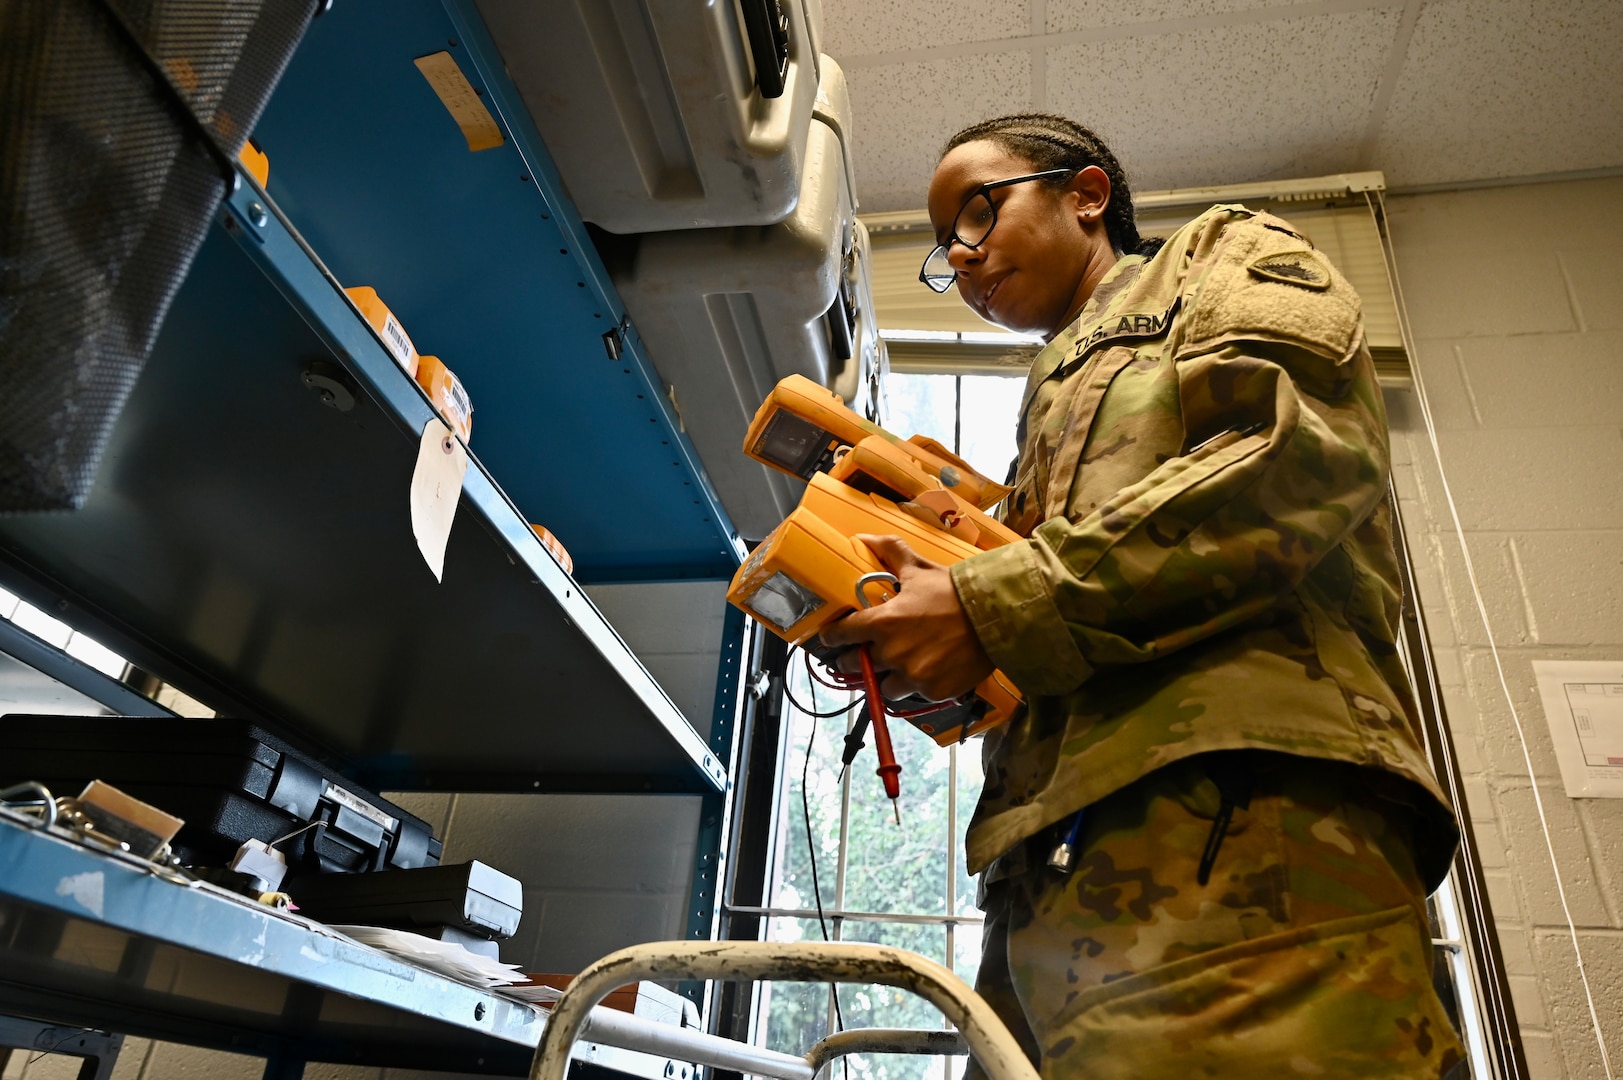 Spc. Jasmine Felton, a District of Columbia National Guard electronics and calibration technician within the Test Measurement Diagnostic Equipment (TMDE) section, conducts inventory at the Surface Equipment Maintenance Facilities/Combined Support Maintenance Shop at Joint Base Anacostia-Bolling, Jan. 18, 2024.Standardized measurements ensure weapons systems from aircraft to mission-critical vehicles operate safely and effectively.